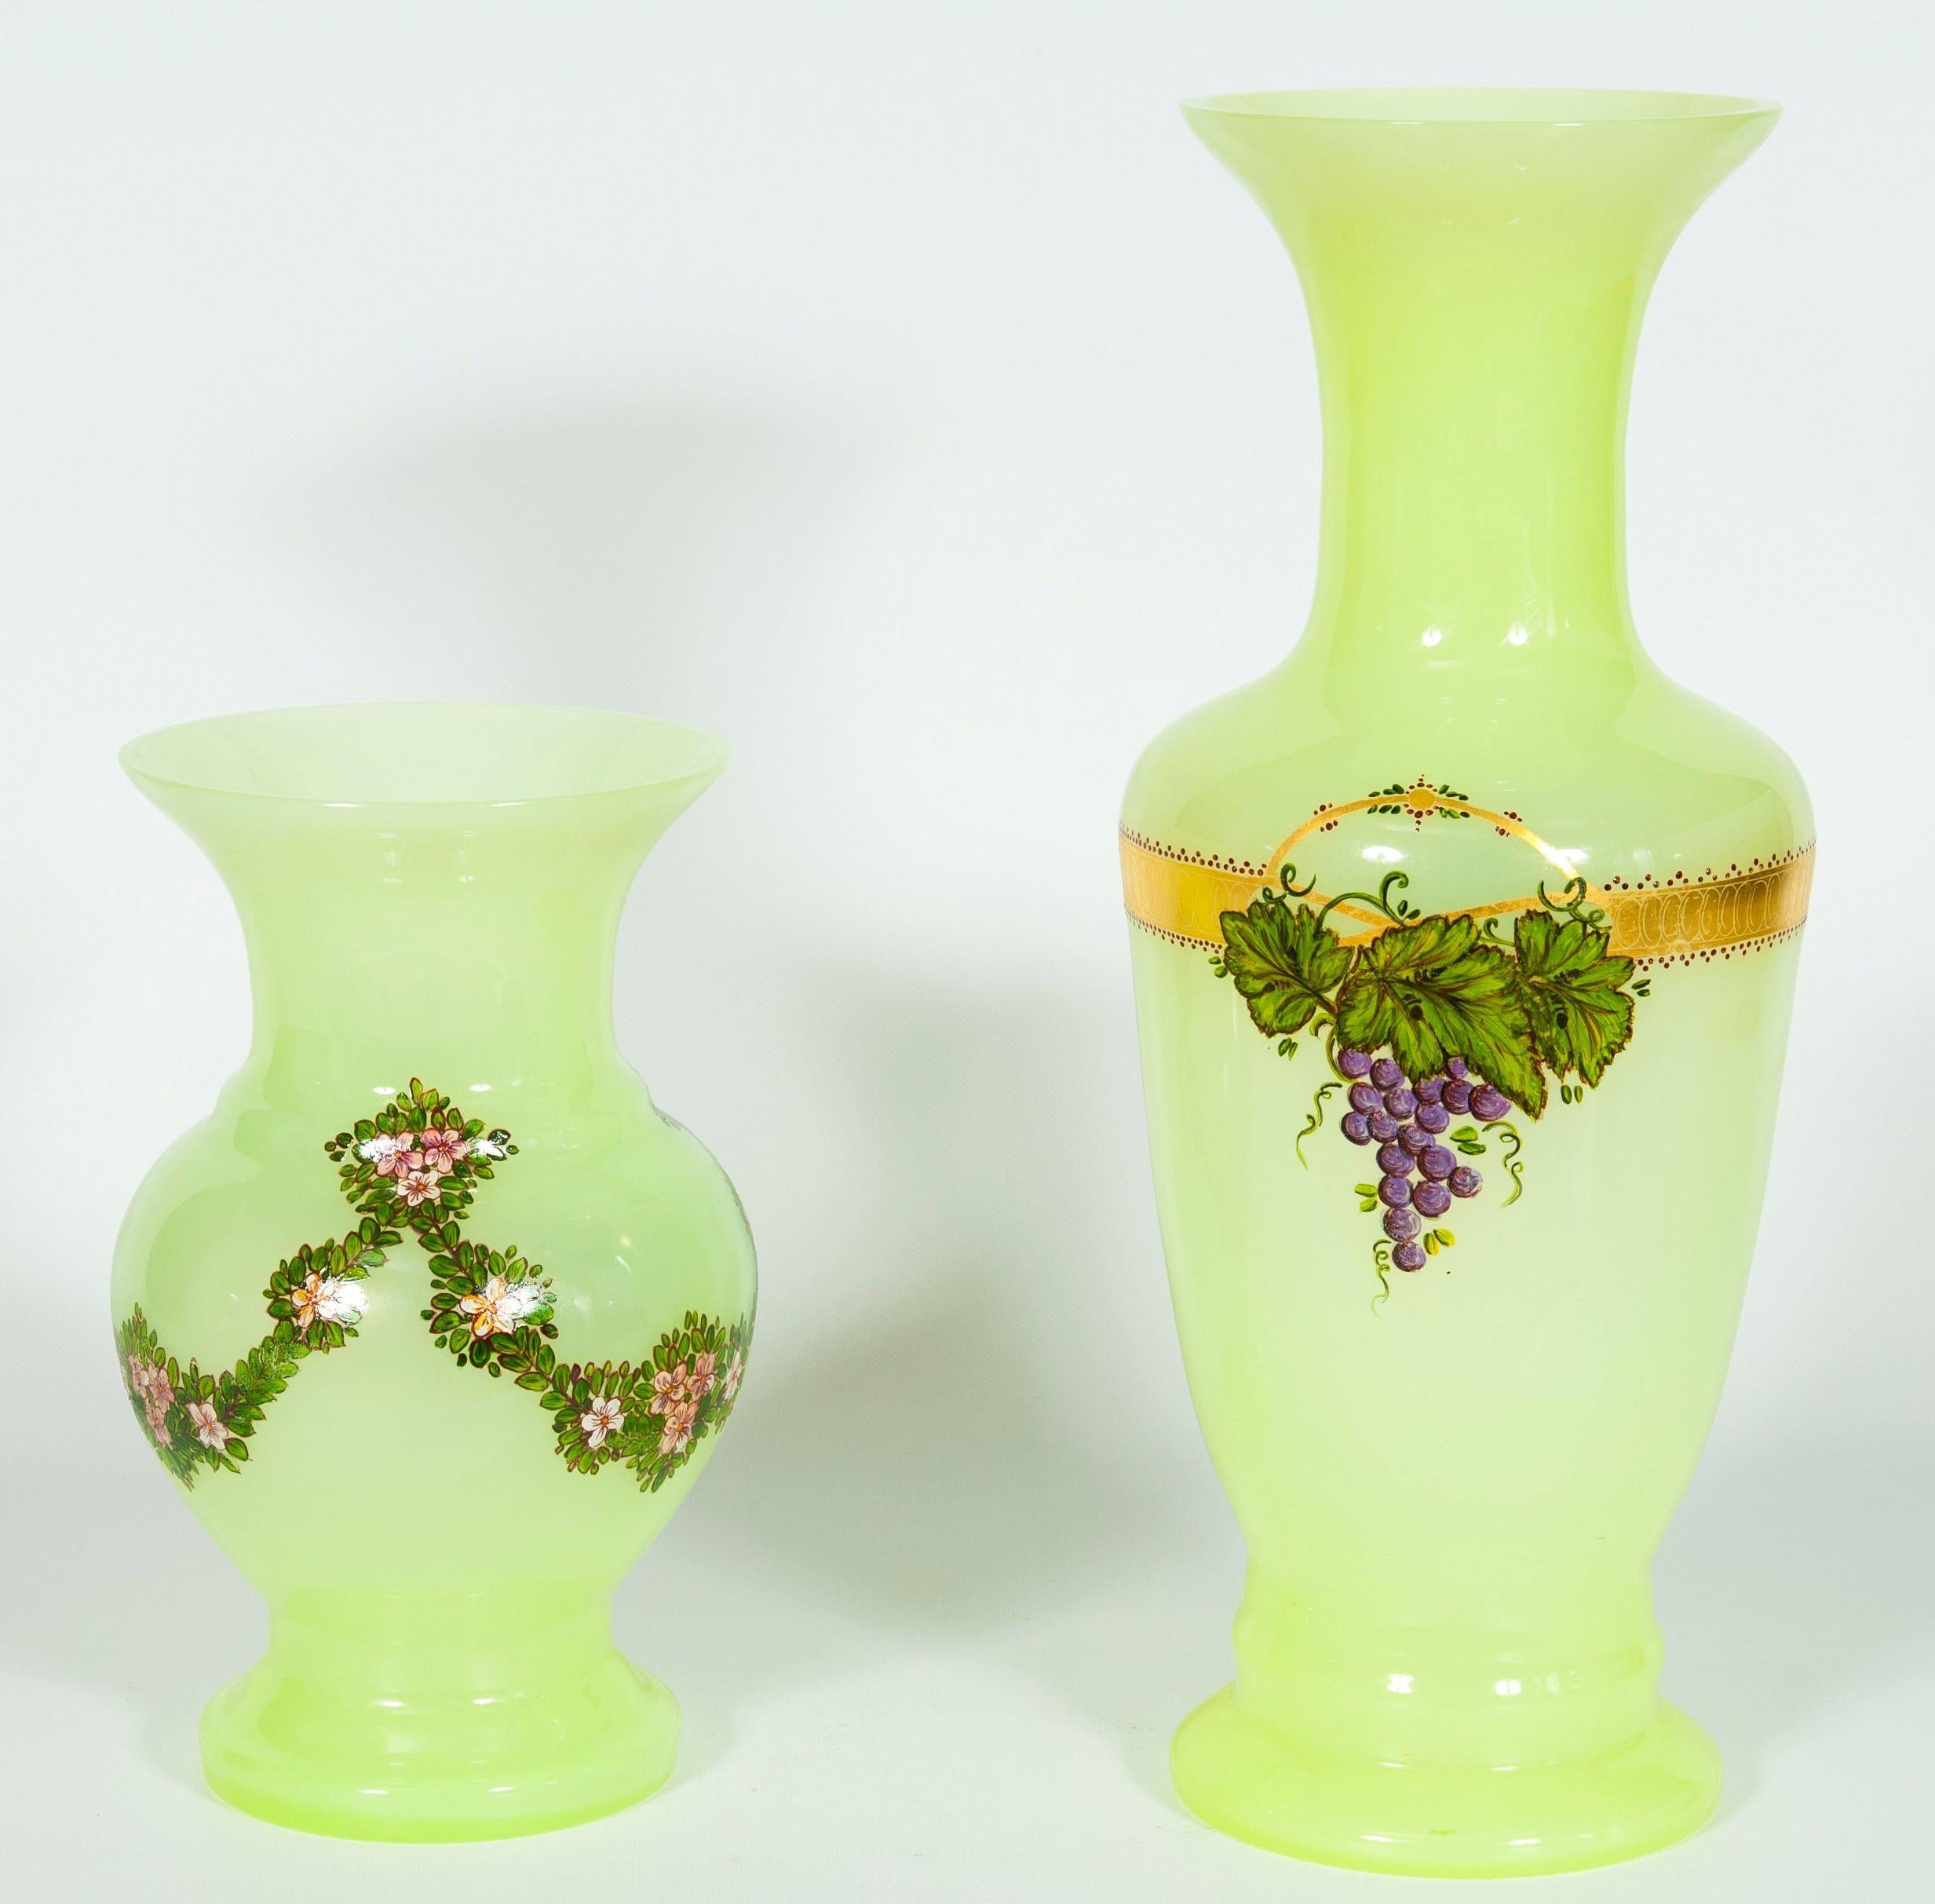 Pair of fluorescent yellow Murano glass vases hand painted and decorated 1990s.
This is a unique pair of elegant venetian vases, blown and handcrafted in the venetian island of Murano, their manufacture is dated circa 1990s. Both Masterpieces are in